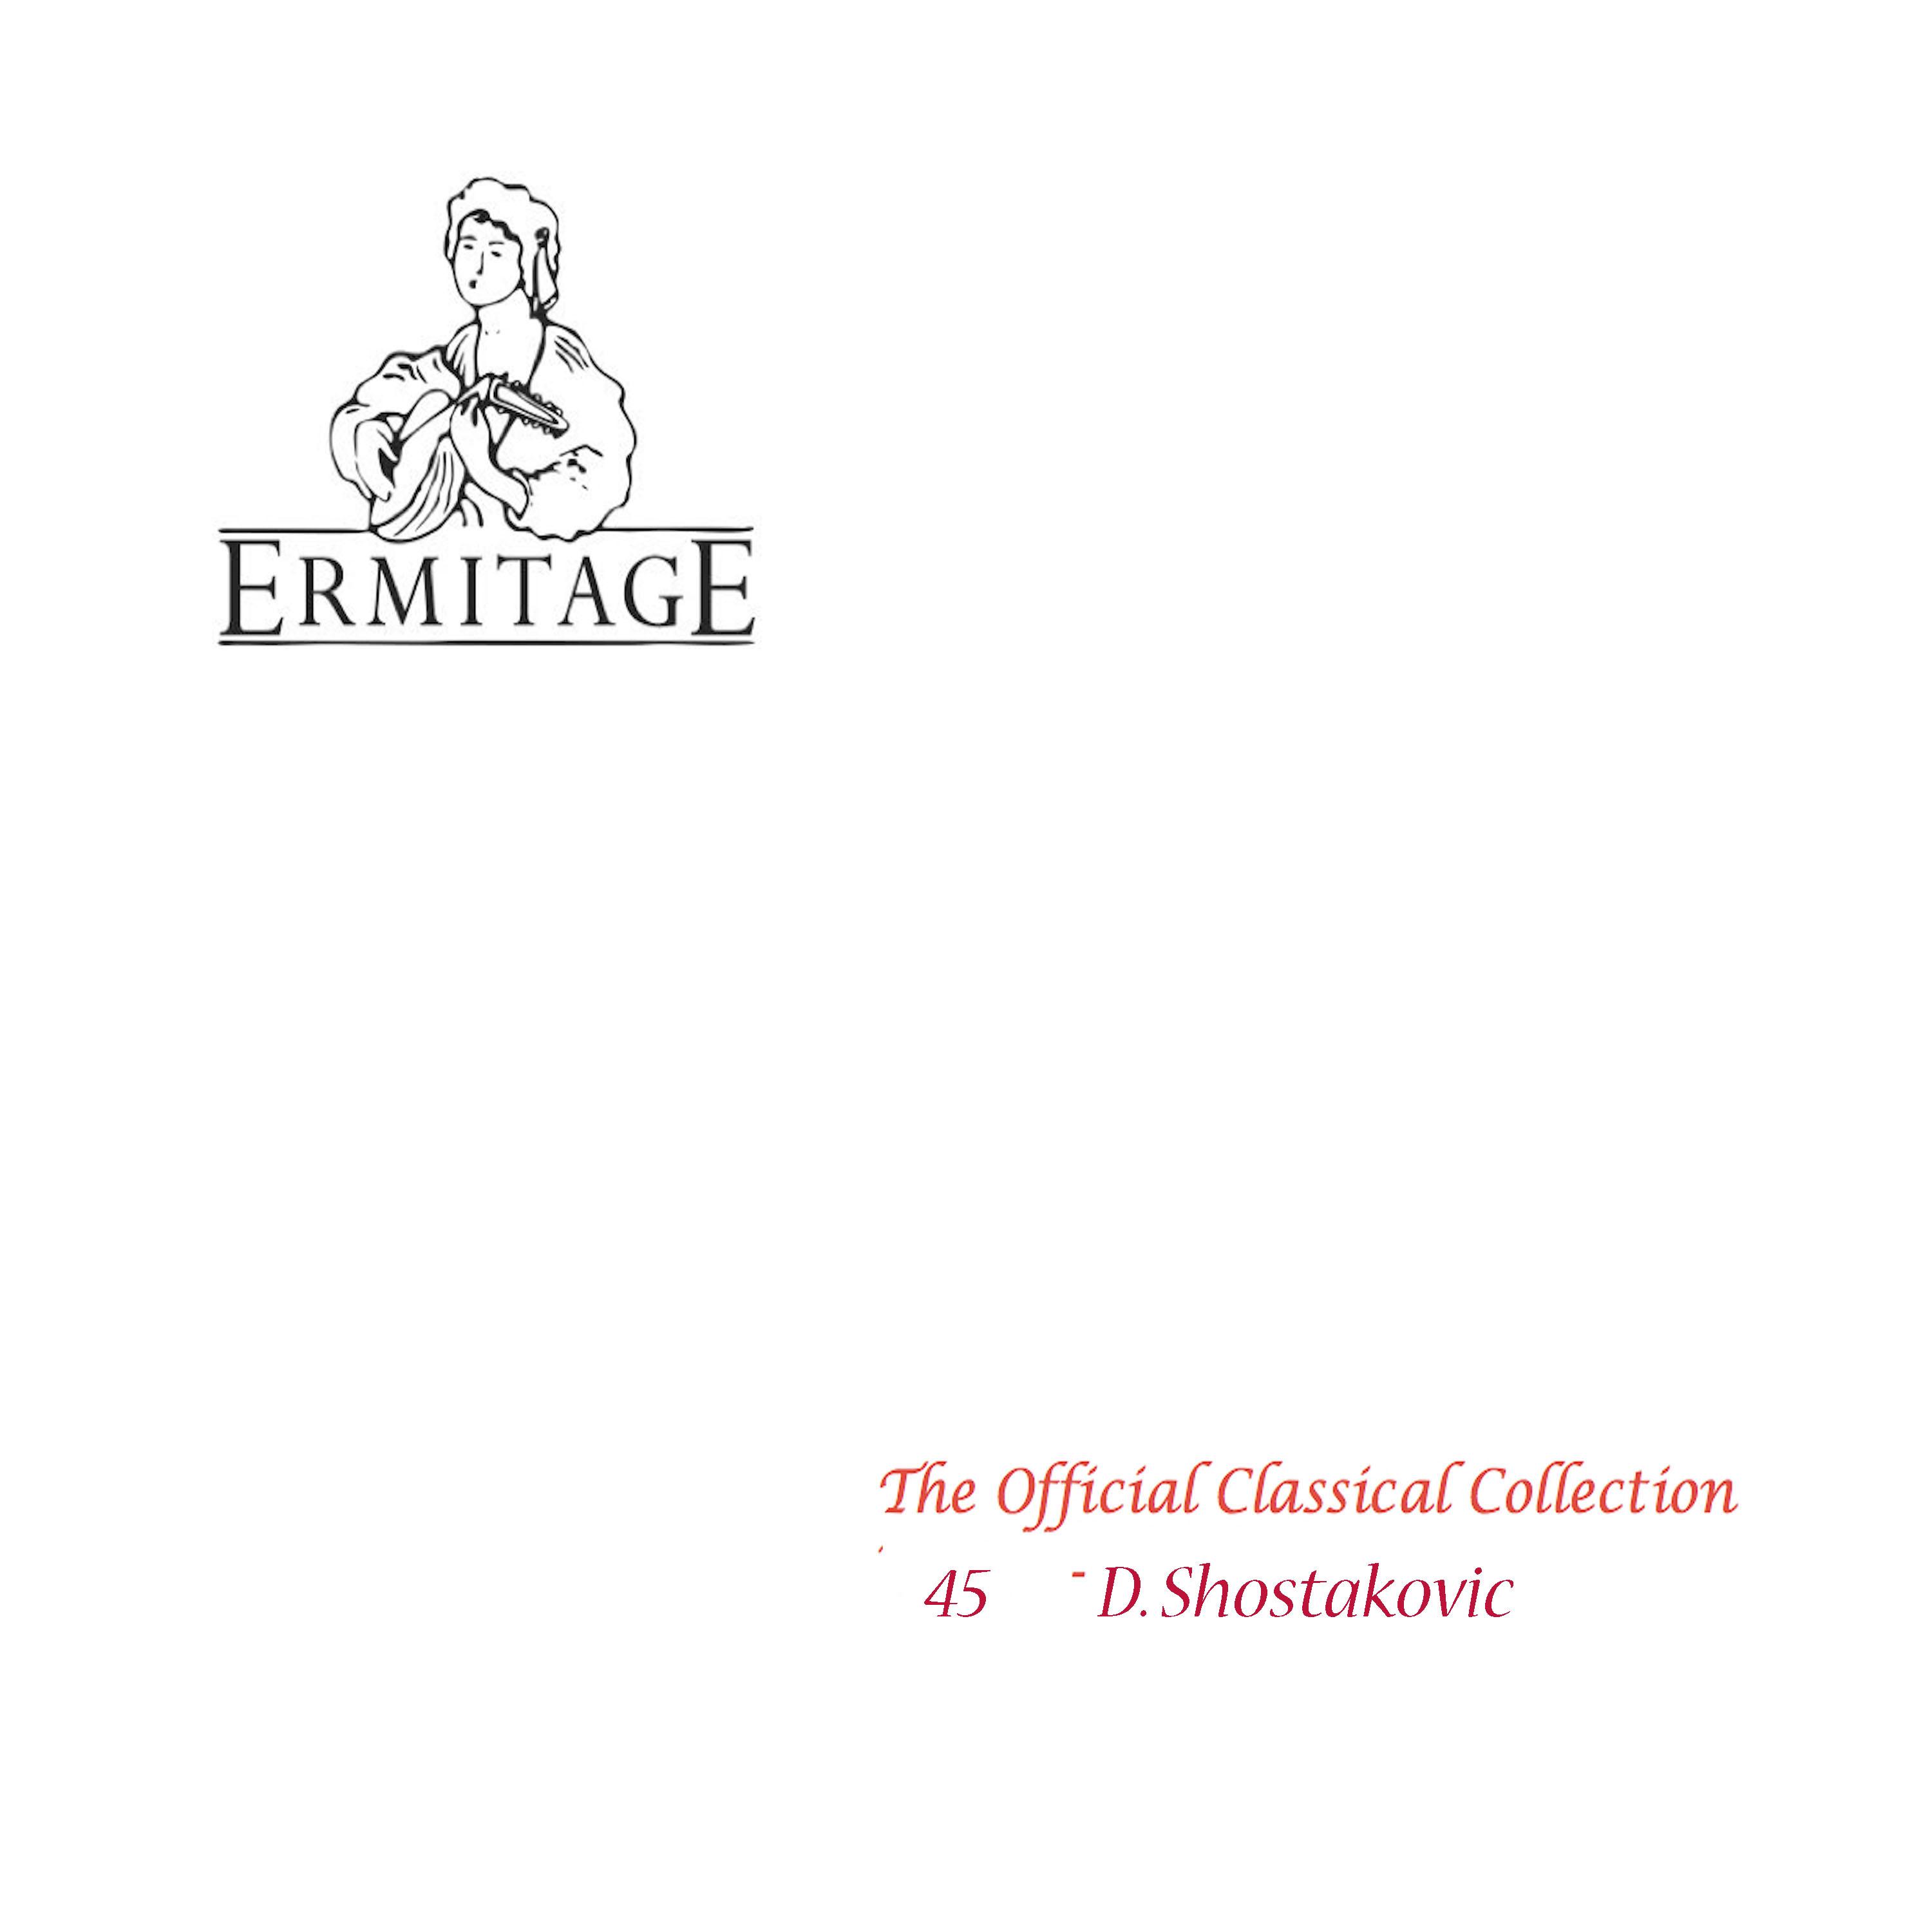 The Official Classical Collection: Vol. 45, D. Shostakovich